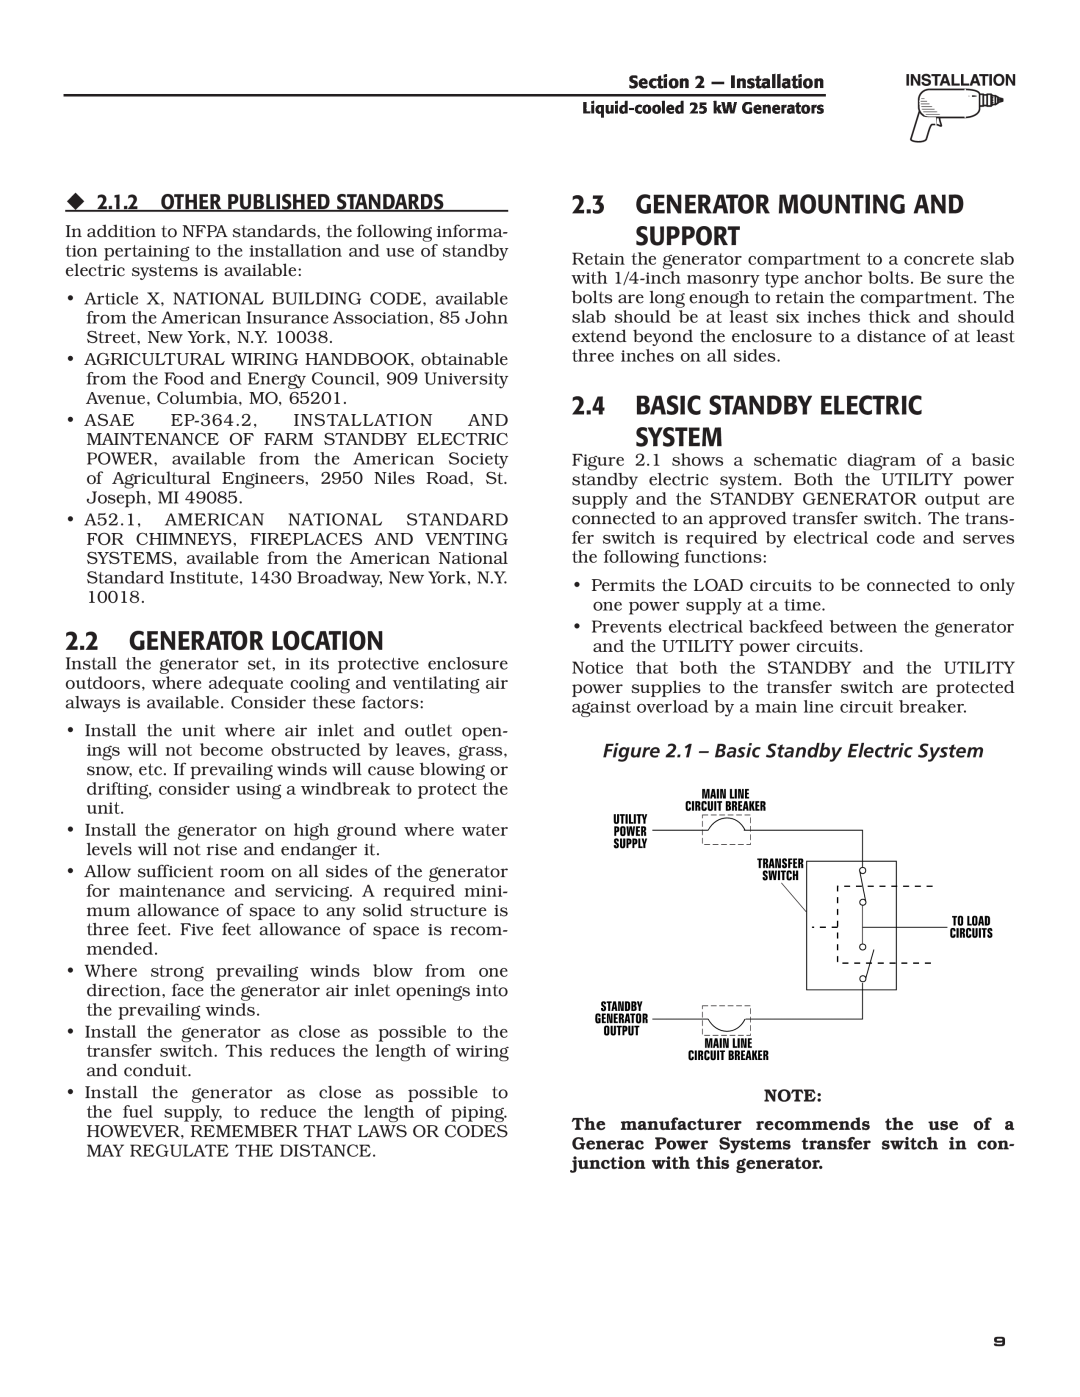 Generac 005031-2 owner manual 2.2GENERATOR LOCATION, 2.3GENERATOR MOUNTING AND SUPPORT, 2.4BASIC STANDBY ELECTRIC SYSTEM 